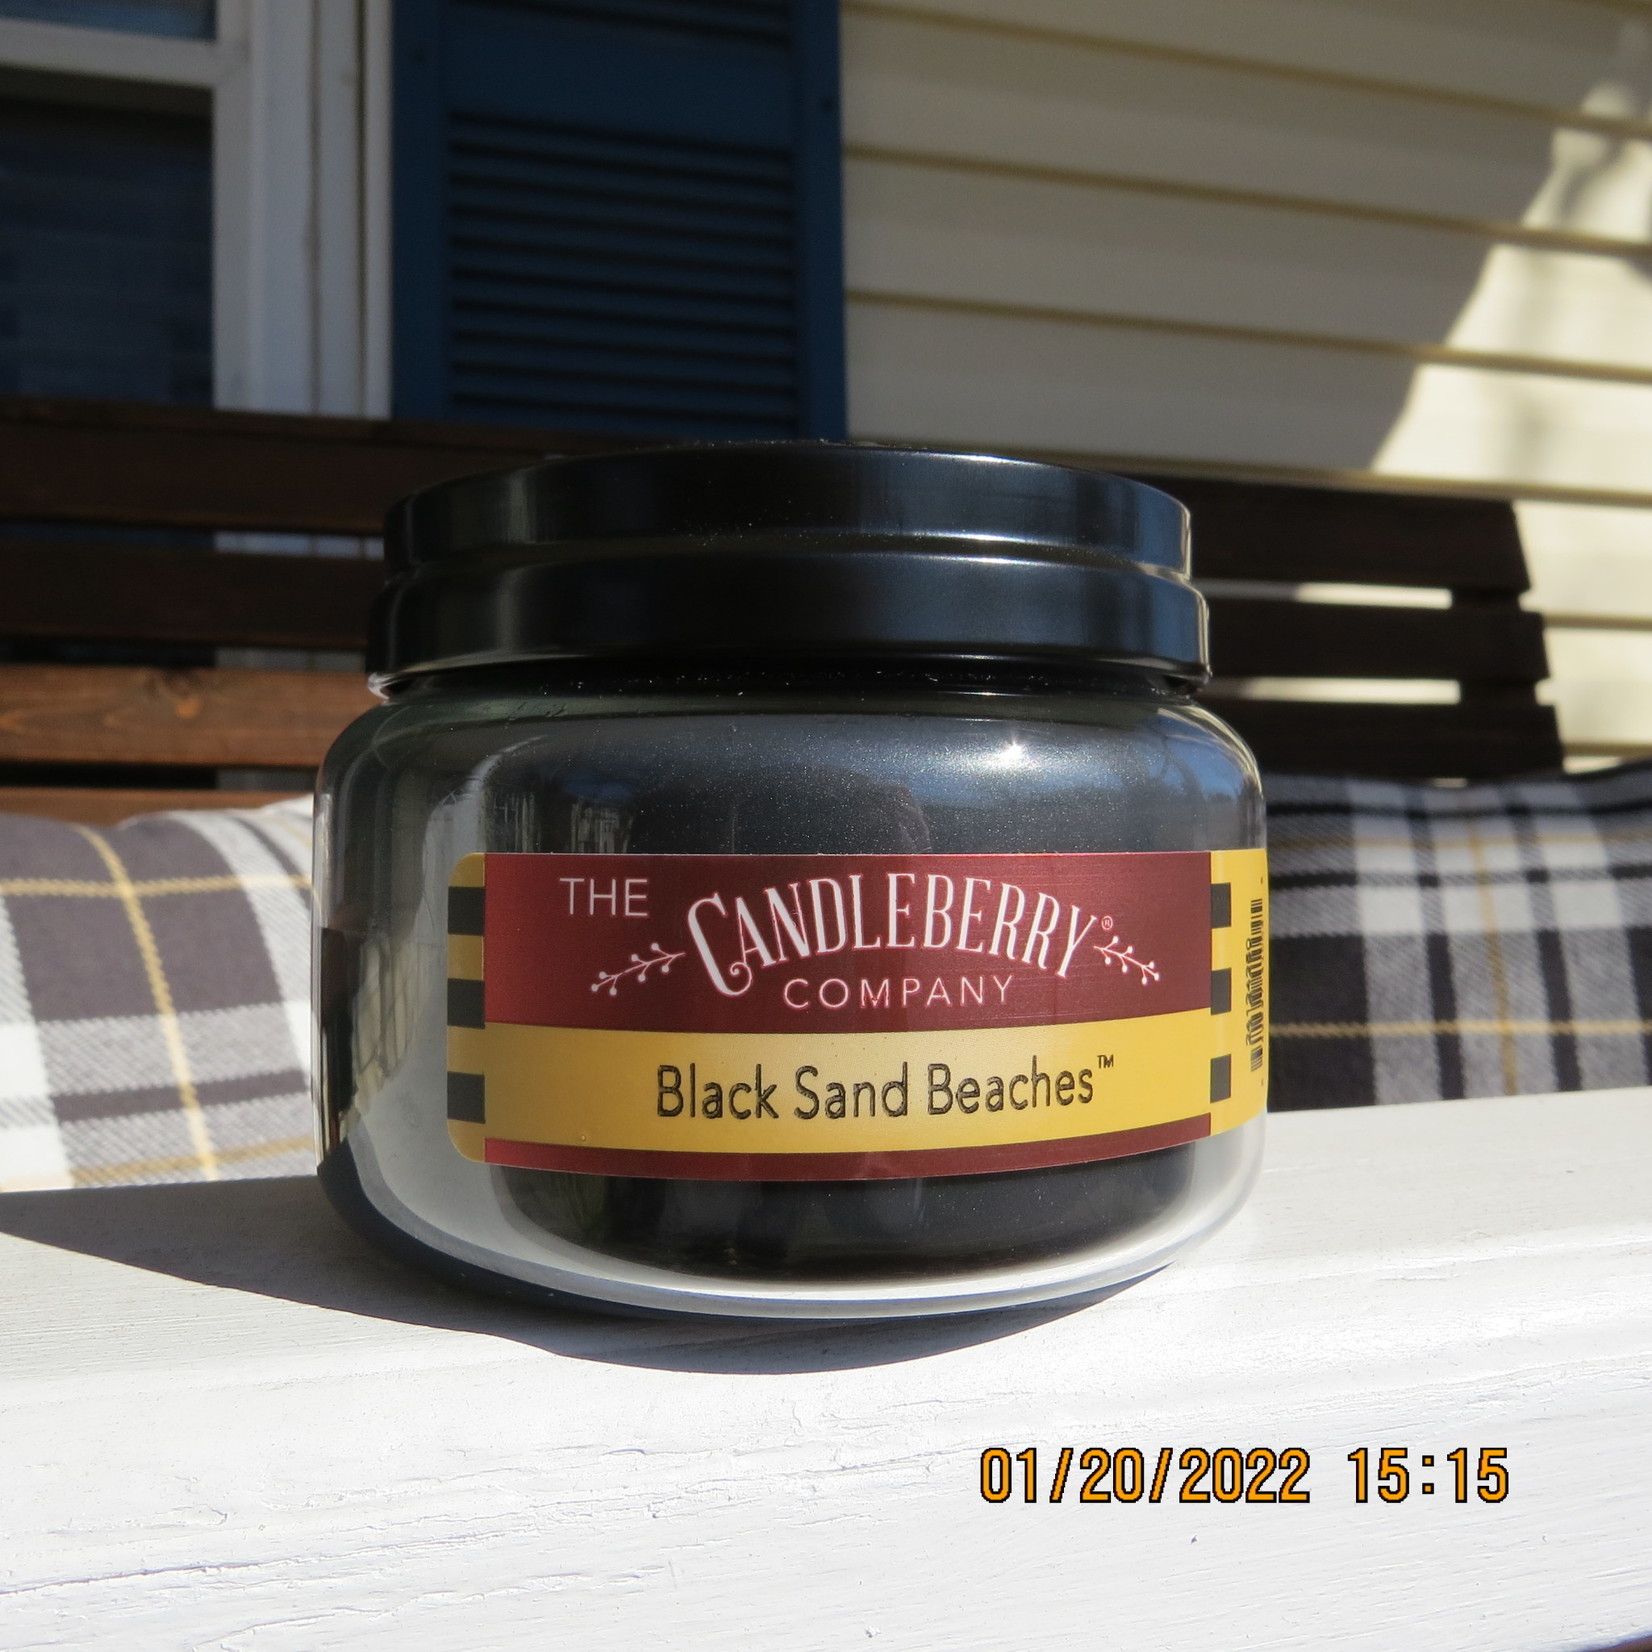 Candleberry Small Black Sand Beaches Candle